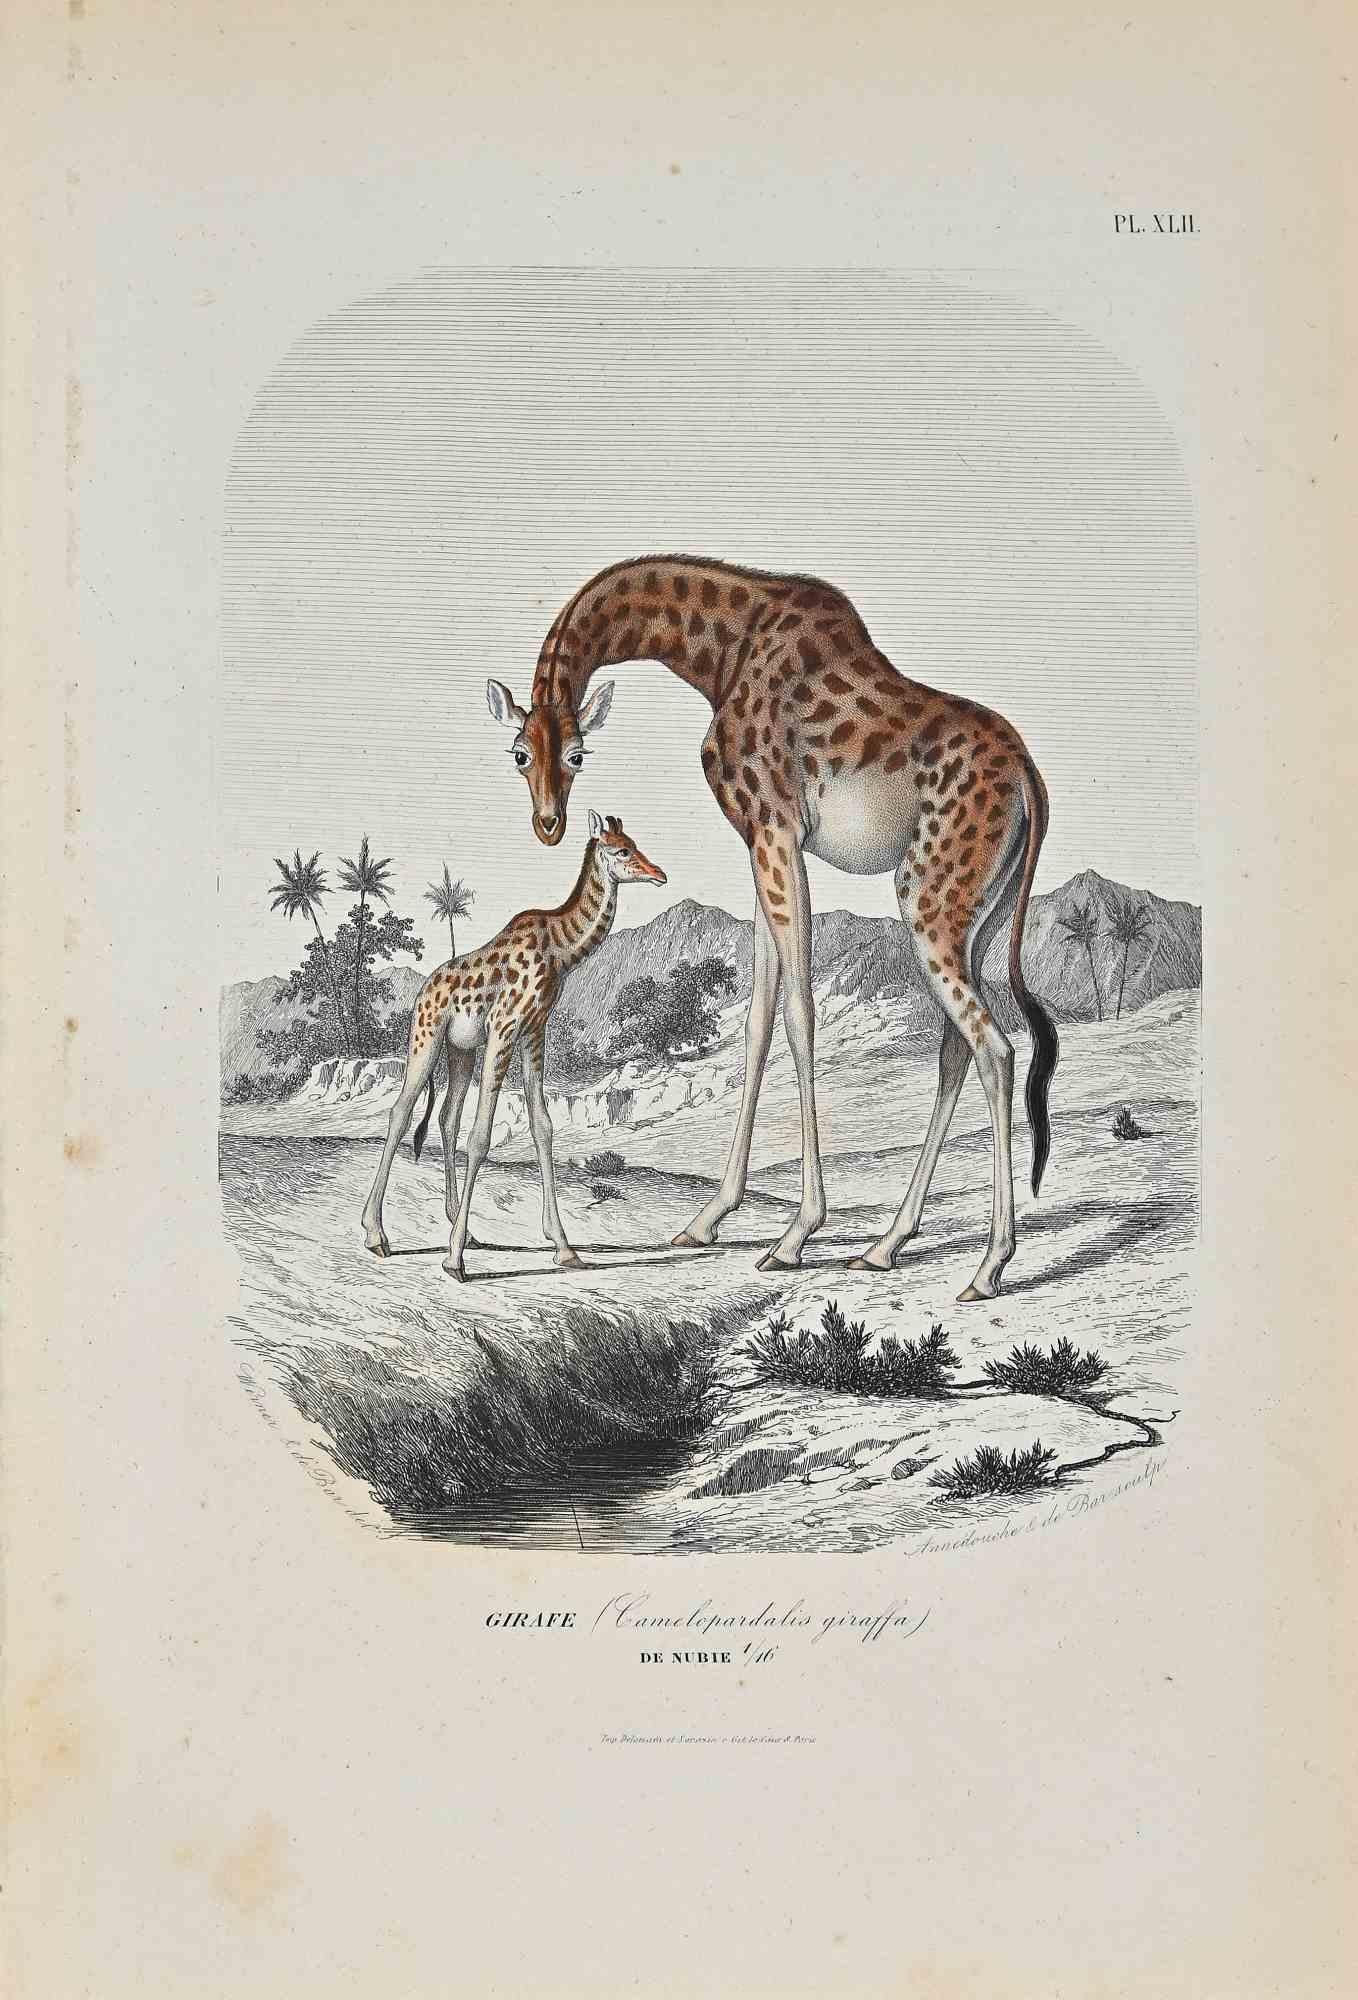 Giraffe is an original lithograph on ivory-colored paper, realized by Paul Gervais (1816-1879). The artwork is from The Series of "Les Trois Règnes de la Nature", and was published in 1854.

Good conditions except for some foxings.

Titled on the